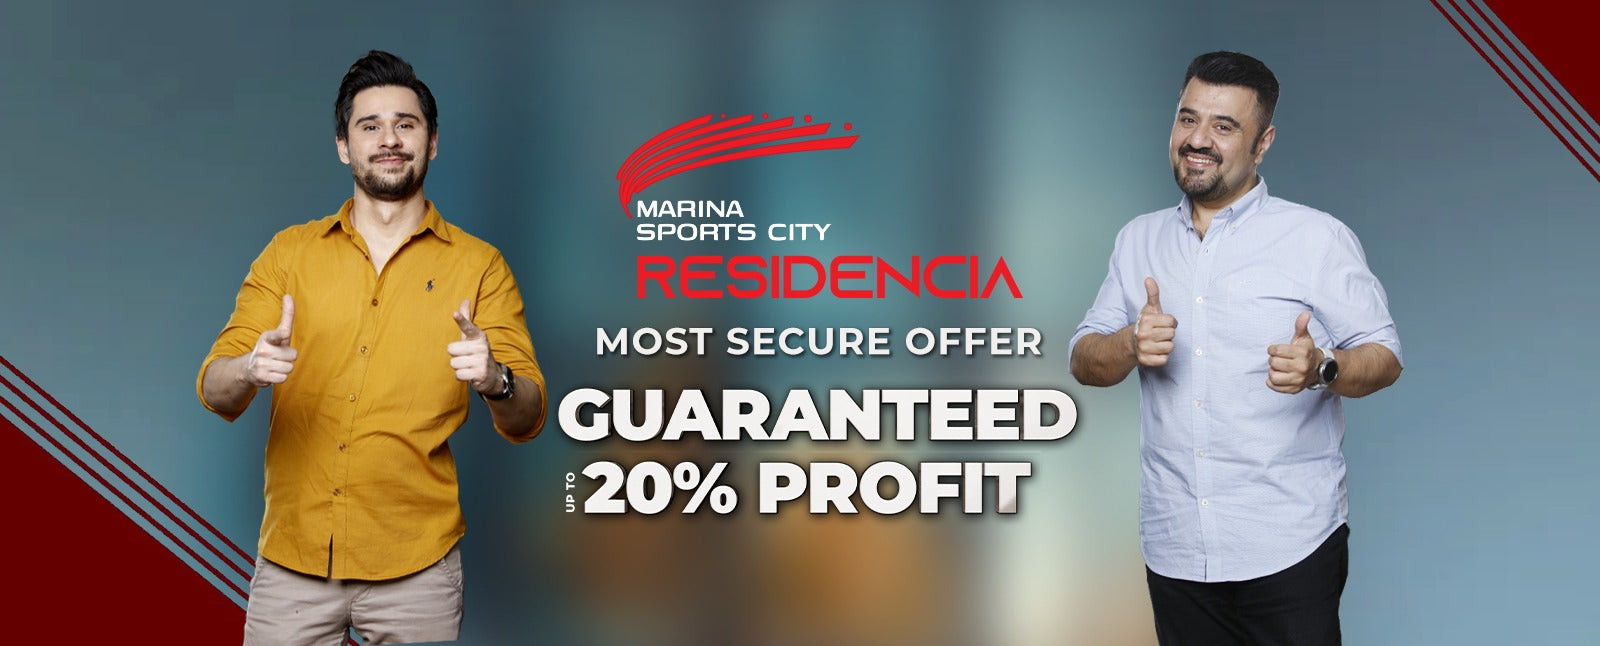 Marina Sports City Residencia ; Most Secured Offer in Pakistan Real Estate Market